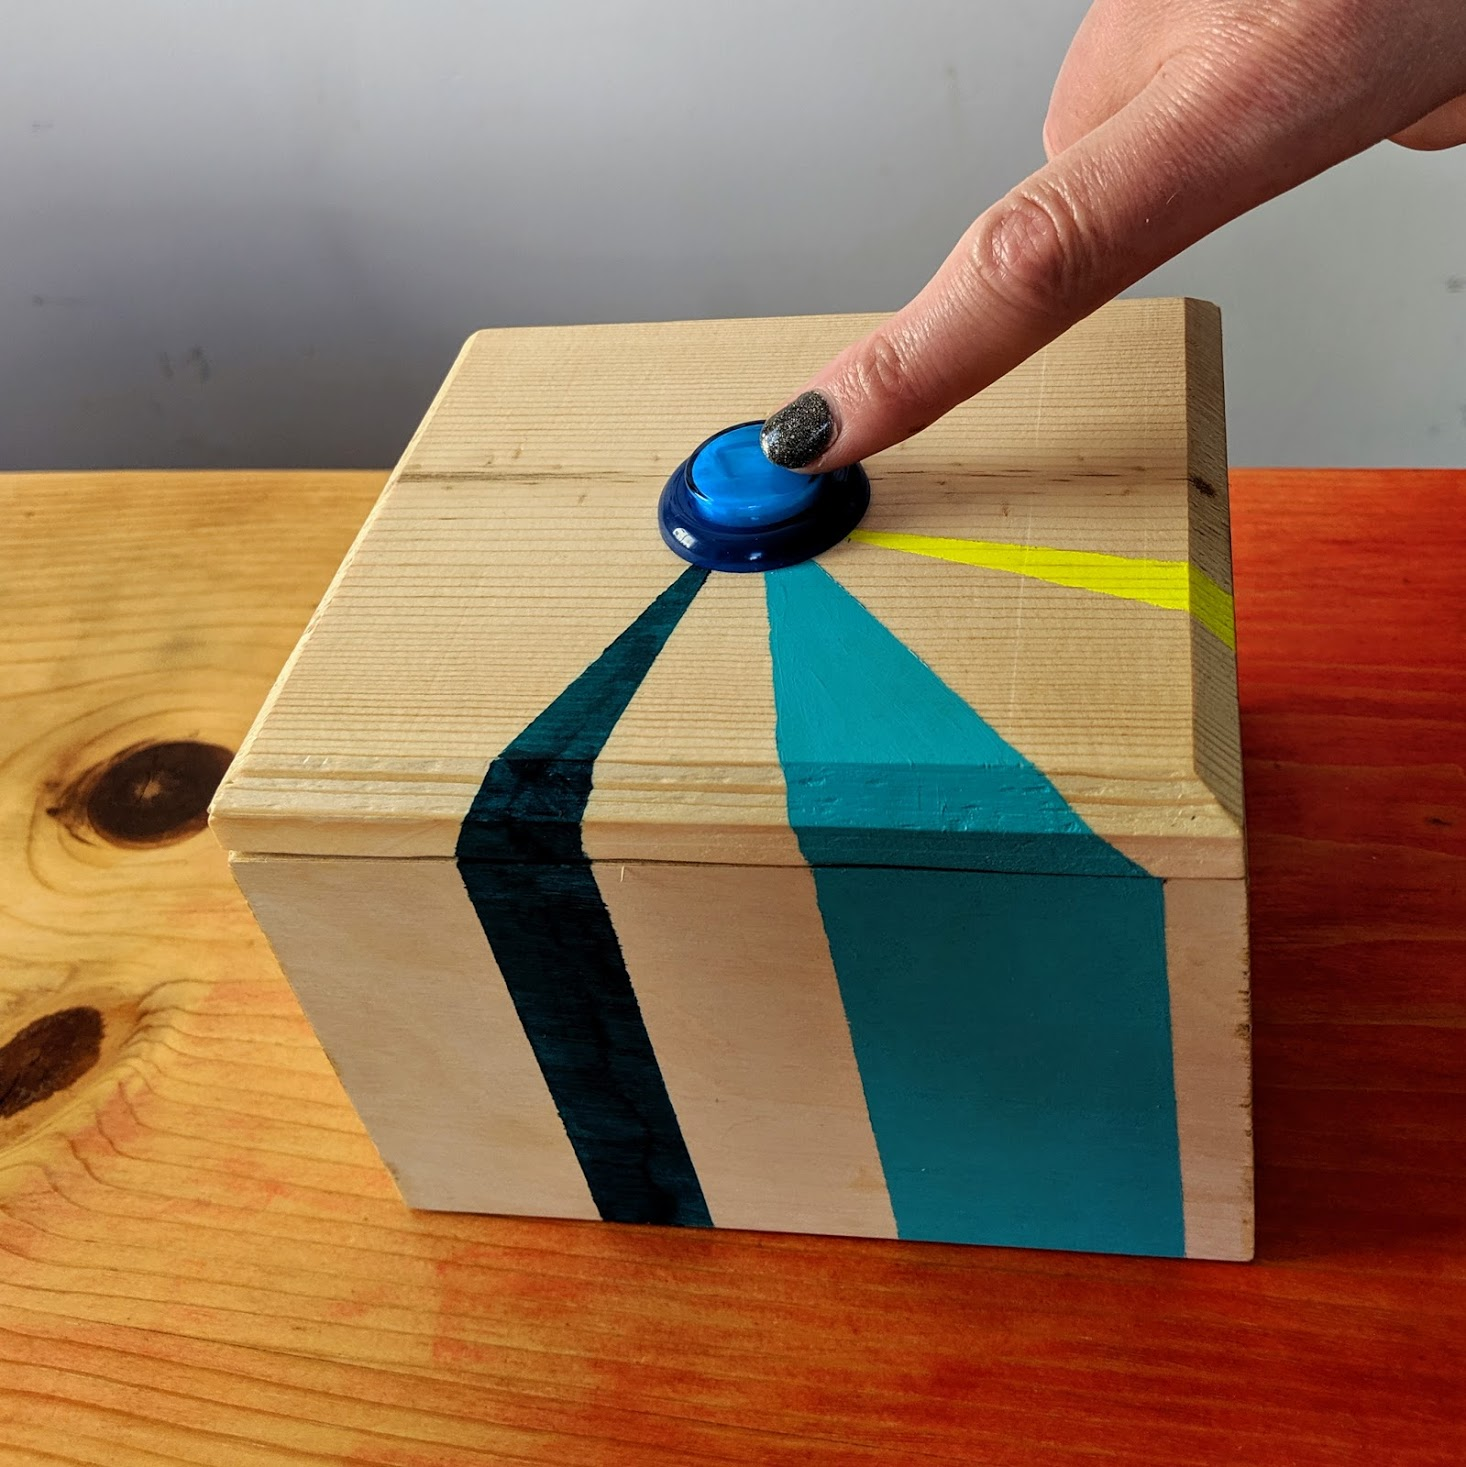 A wooden box with a blue button on the top sits on a table. The box has turquoise, teal, and neon yellow stripes and a finger is pointing at the button.